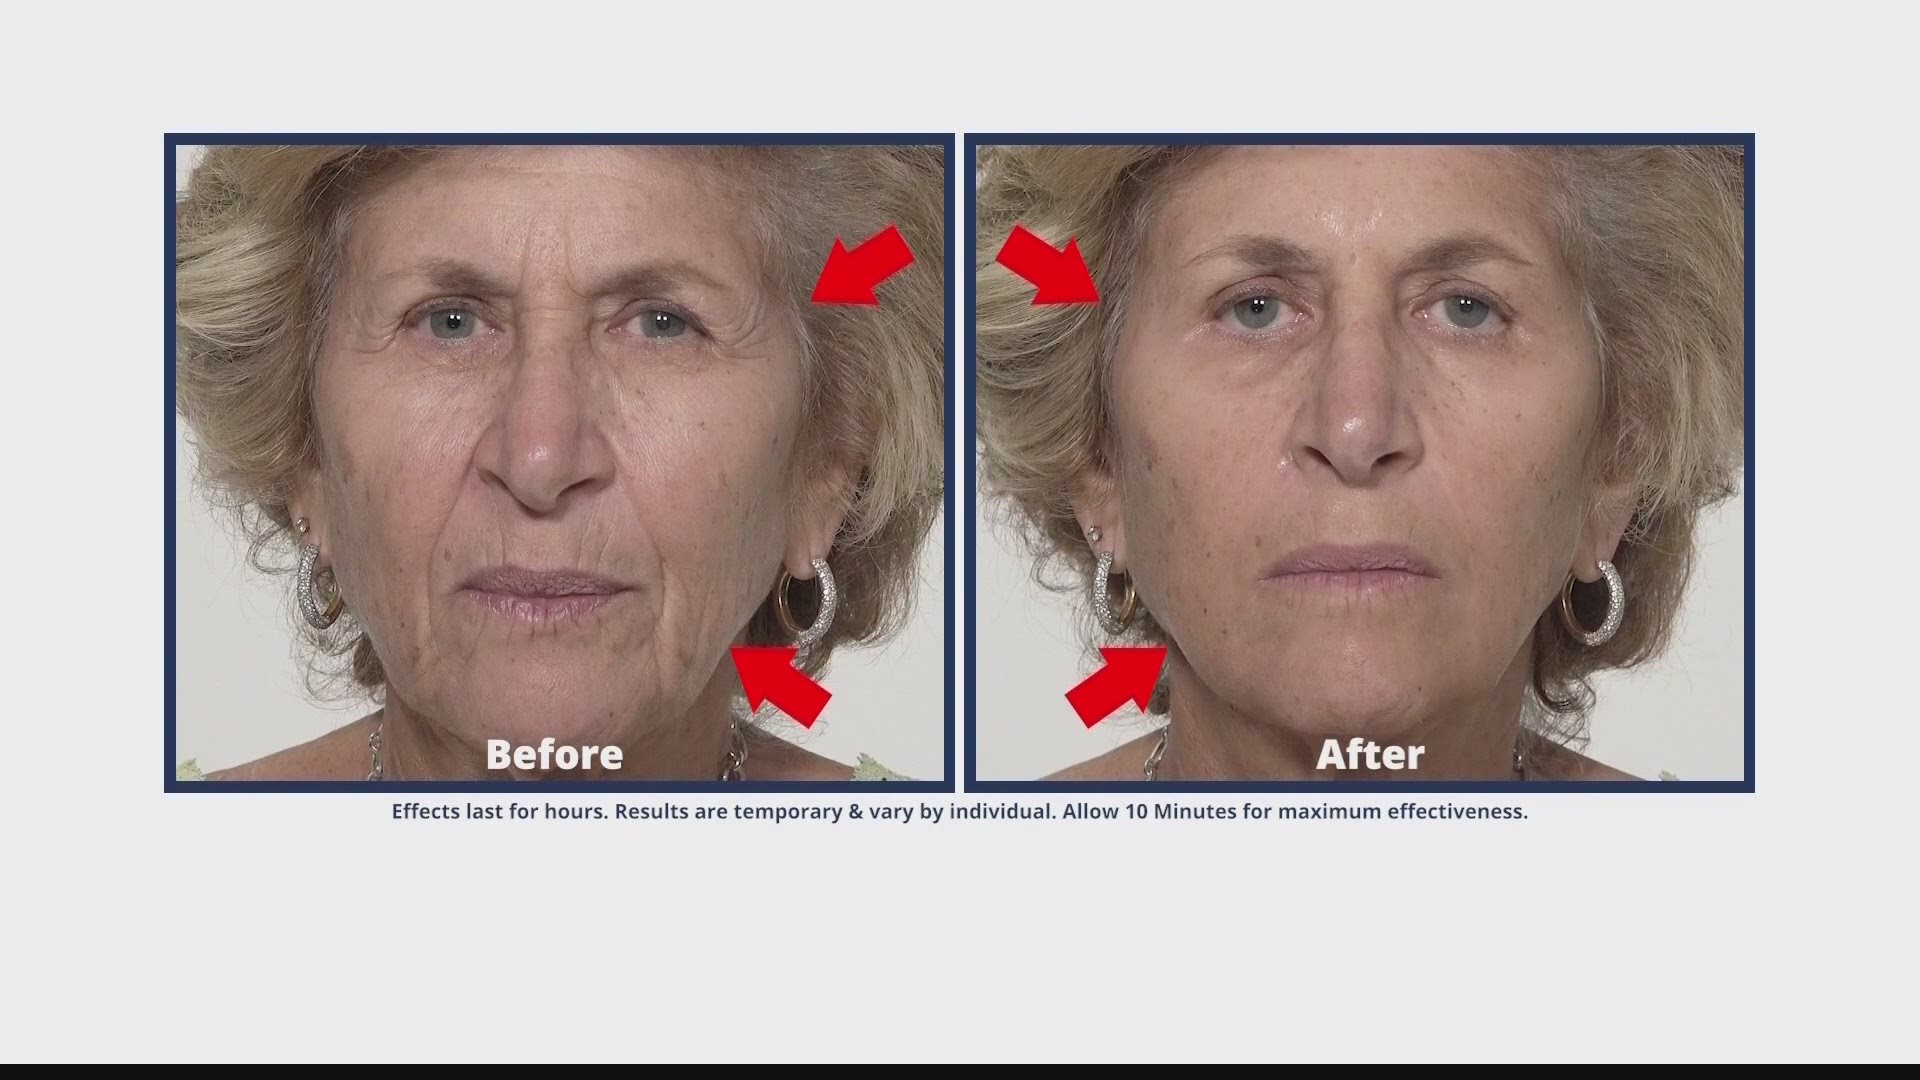 Take years off of your appearance in just minutes with Plexaderm.